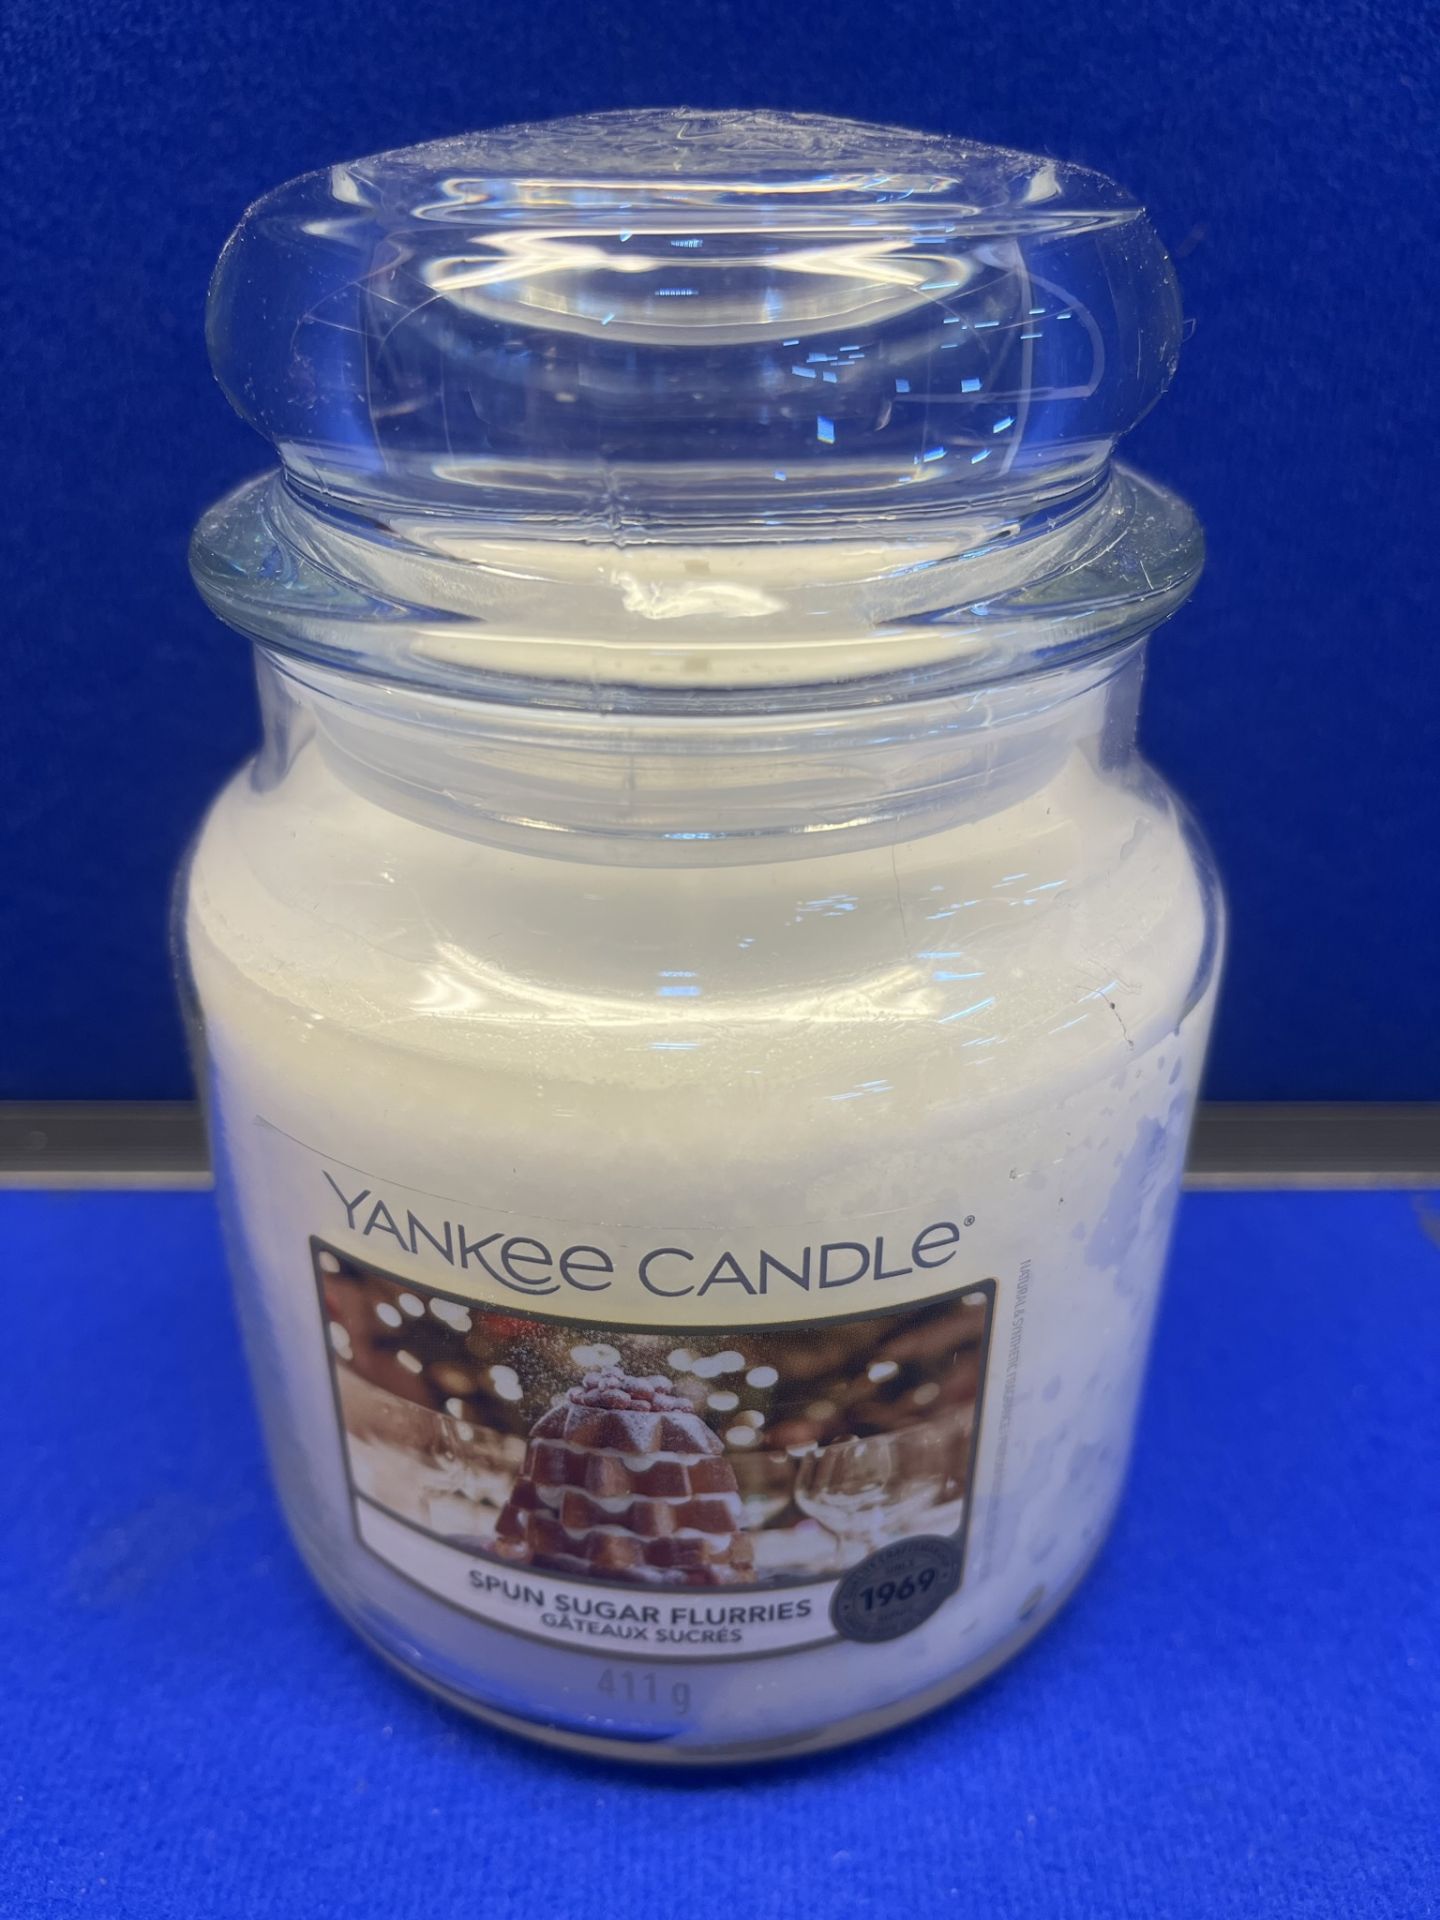 25 x Various Scented Medium Jar Yankee Candles - See Description - Image 4 of 4